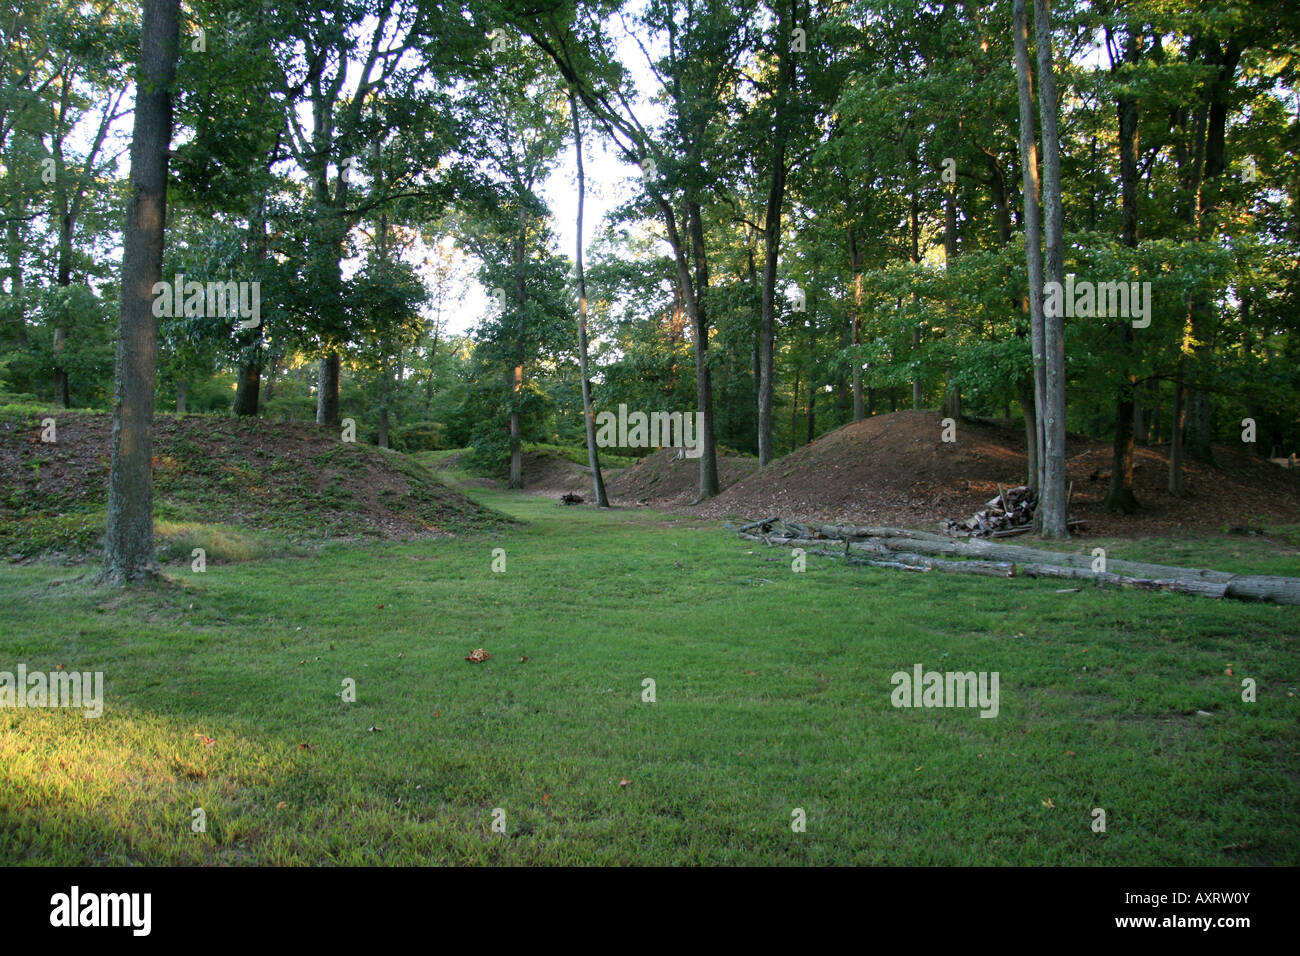 Defensive earth entrenchments inside Fort Darling on Drewry's Bluff, Richmond, VA. Stock Photo